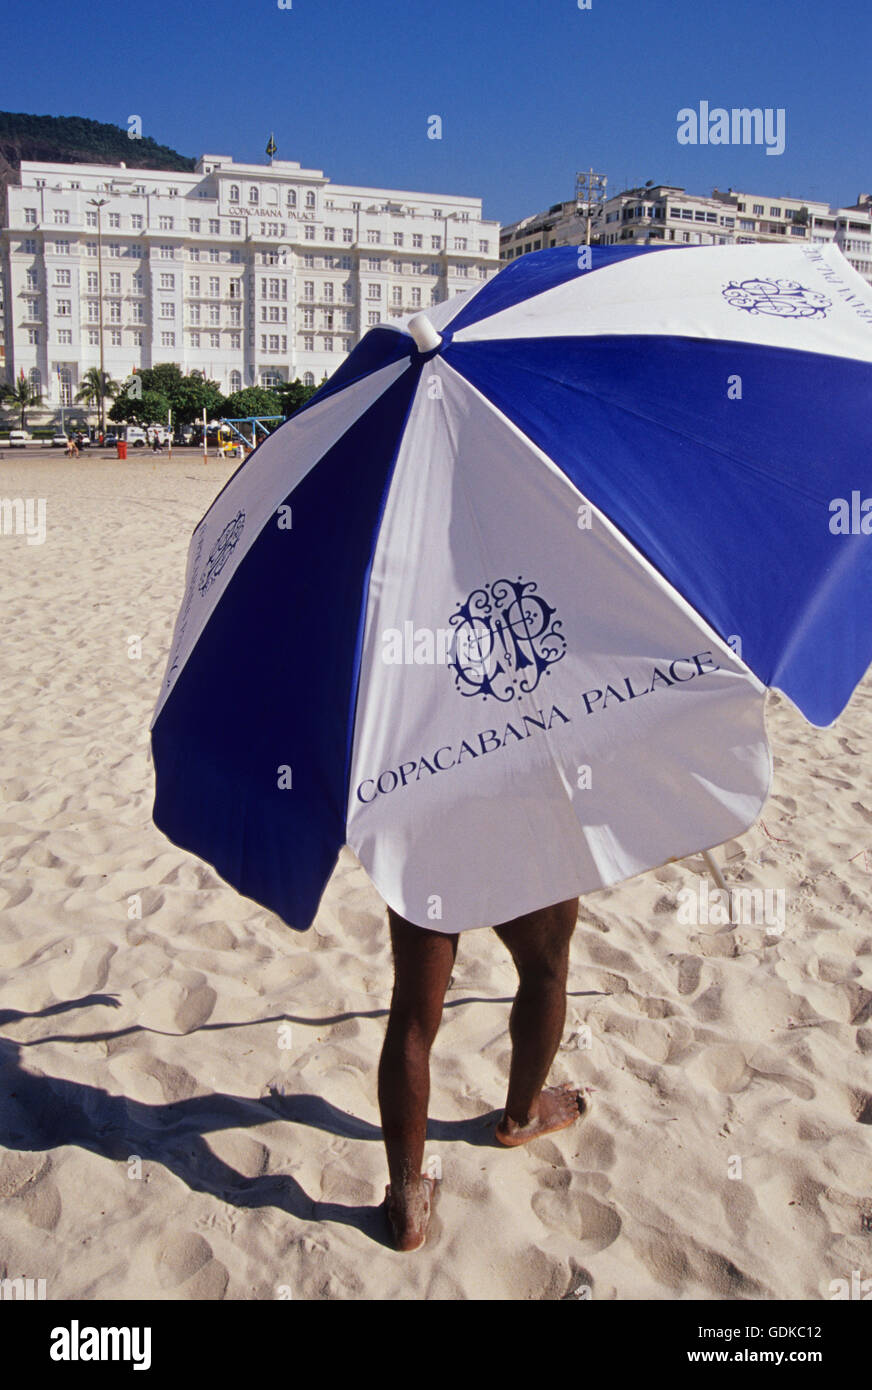 Service to guest - umbrellas at the beach - The Belmond Copacabana Palace is a luxury hotel located on Copacabana Beach in Rio de Janeiro, Brazil - the famous hotel is widely considered as South America's premier hotel, and has received the rich and famous for over 90 years. It faces the coast, and consists of an 8-story main building and a 14-story annex. The Art Deco hotel was designed by French architect Joseph Gire. Stock Photo